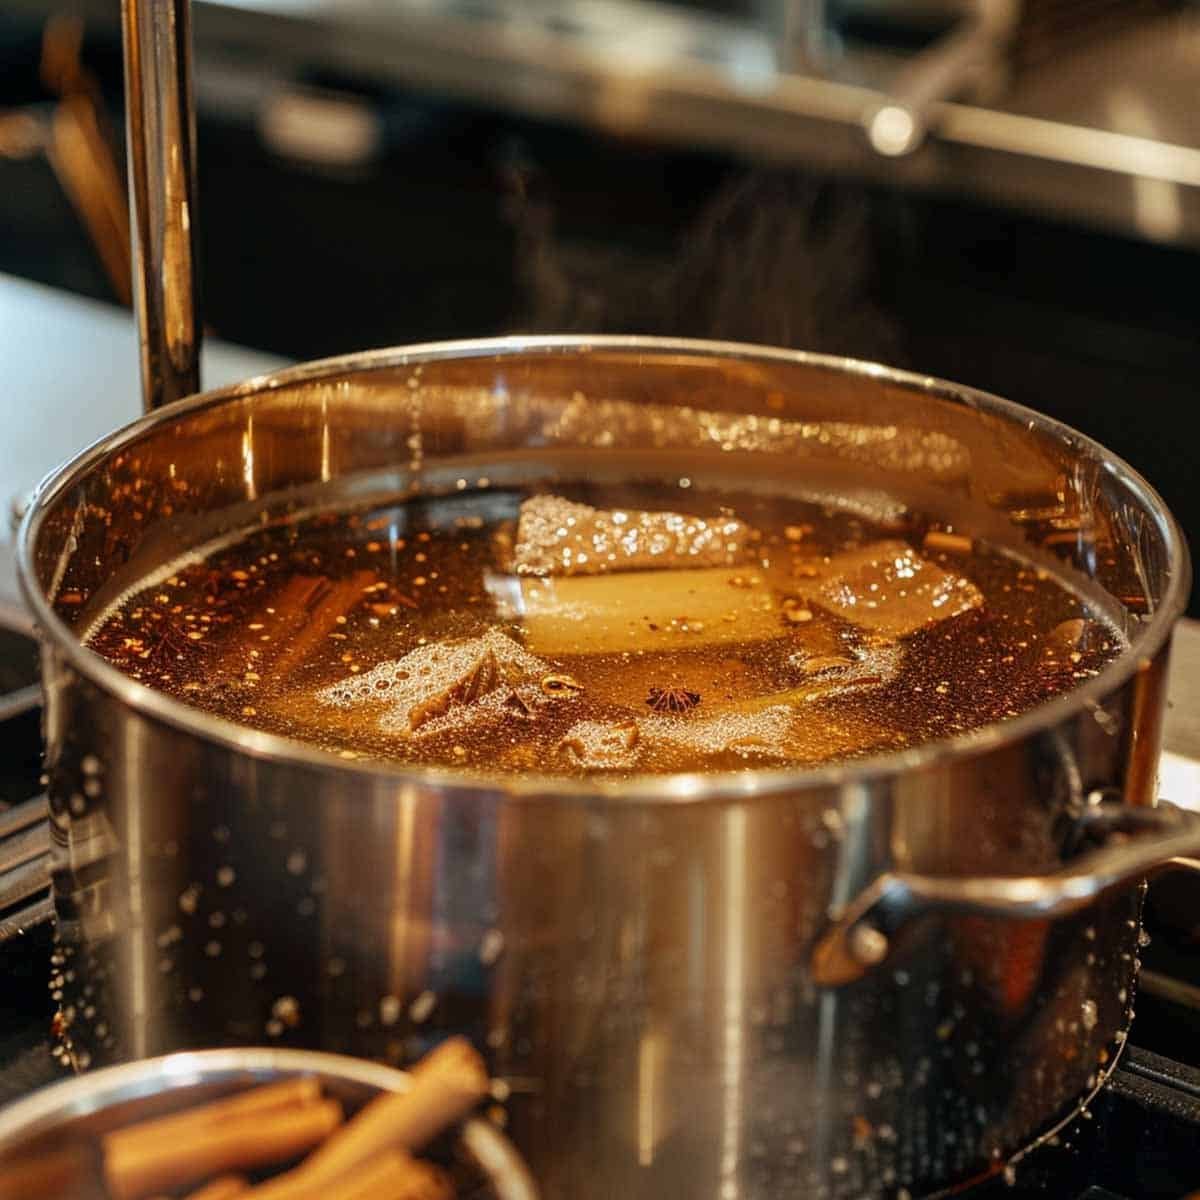 A large pot of broth simmering on a cooktop, filled with beef bones and aromatic ingredients like cinnamon sticks and star anise. Steam rises from the pot, indicating the ongoing cooking process, with the kitchen setting visible in the background.